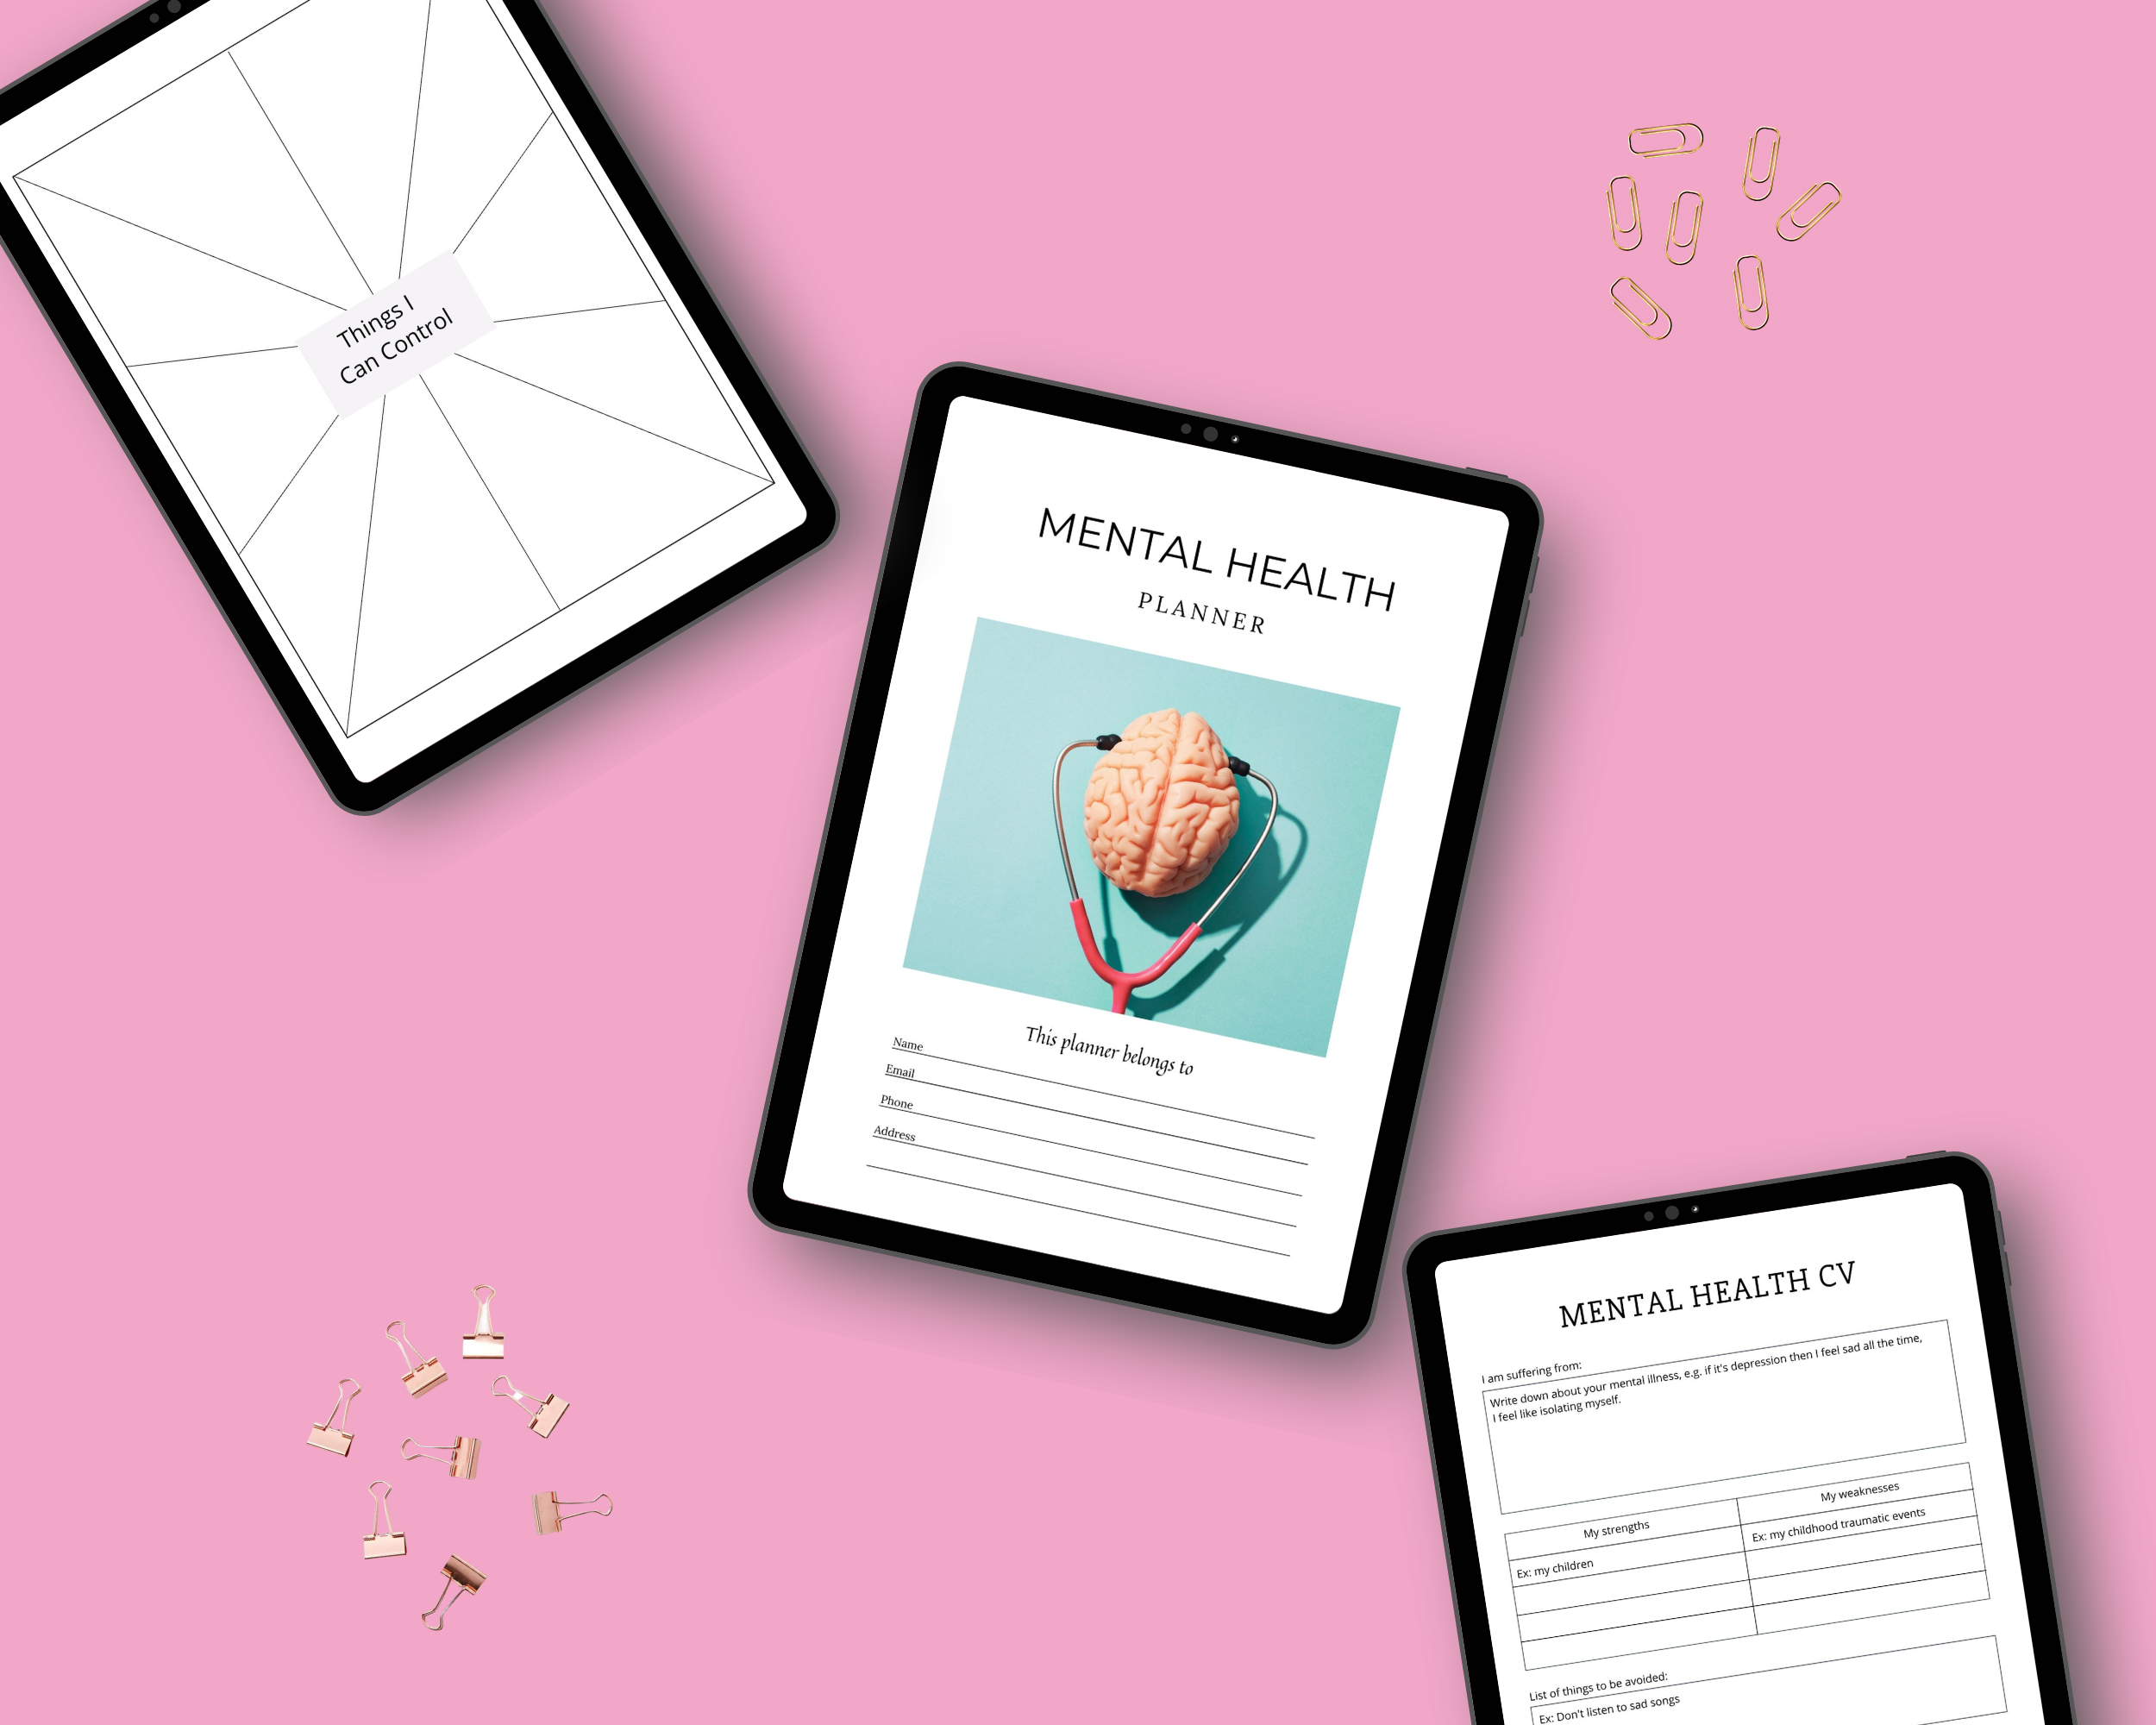 Editable Mental Health Therapy Planner in Canva | Commercial Use